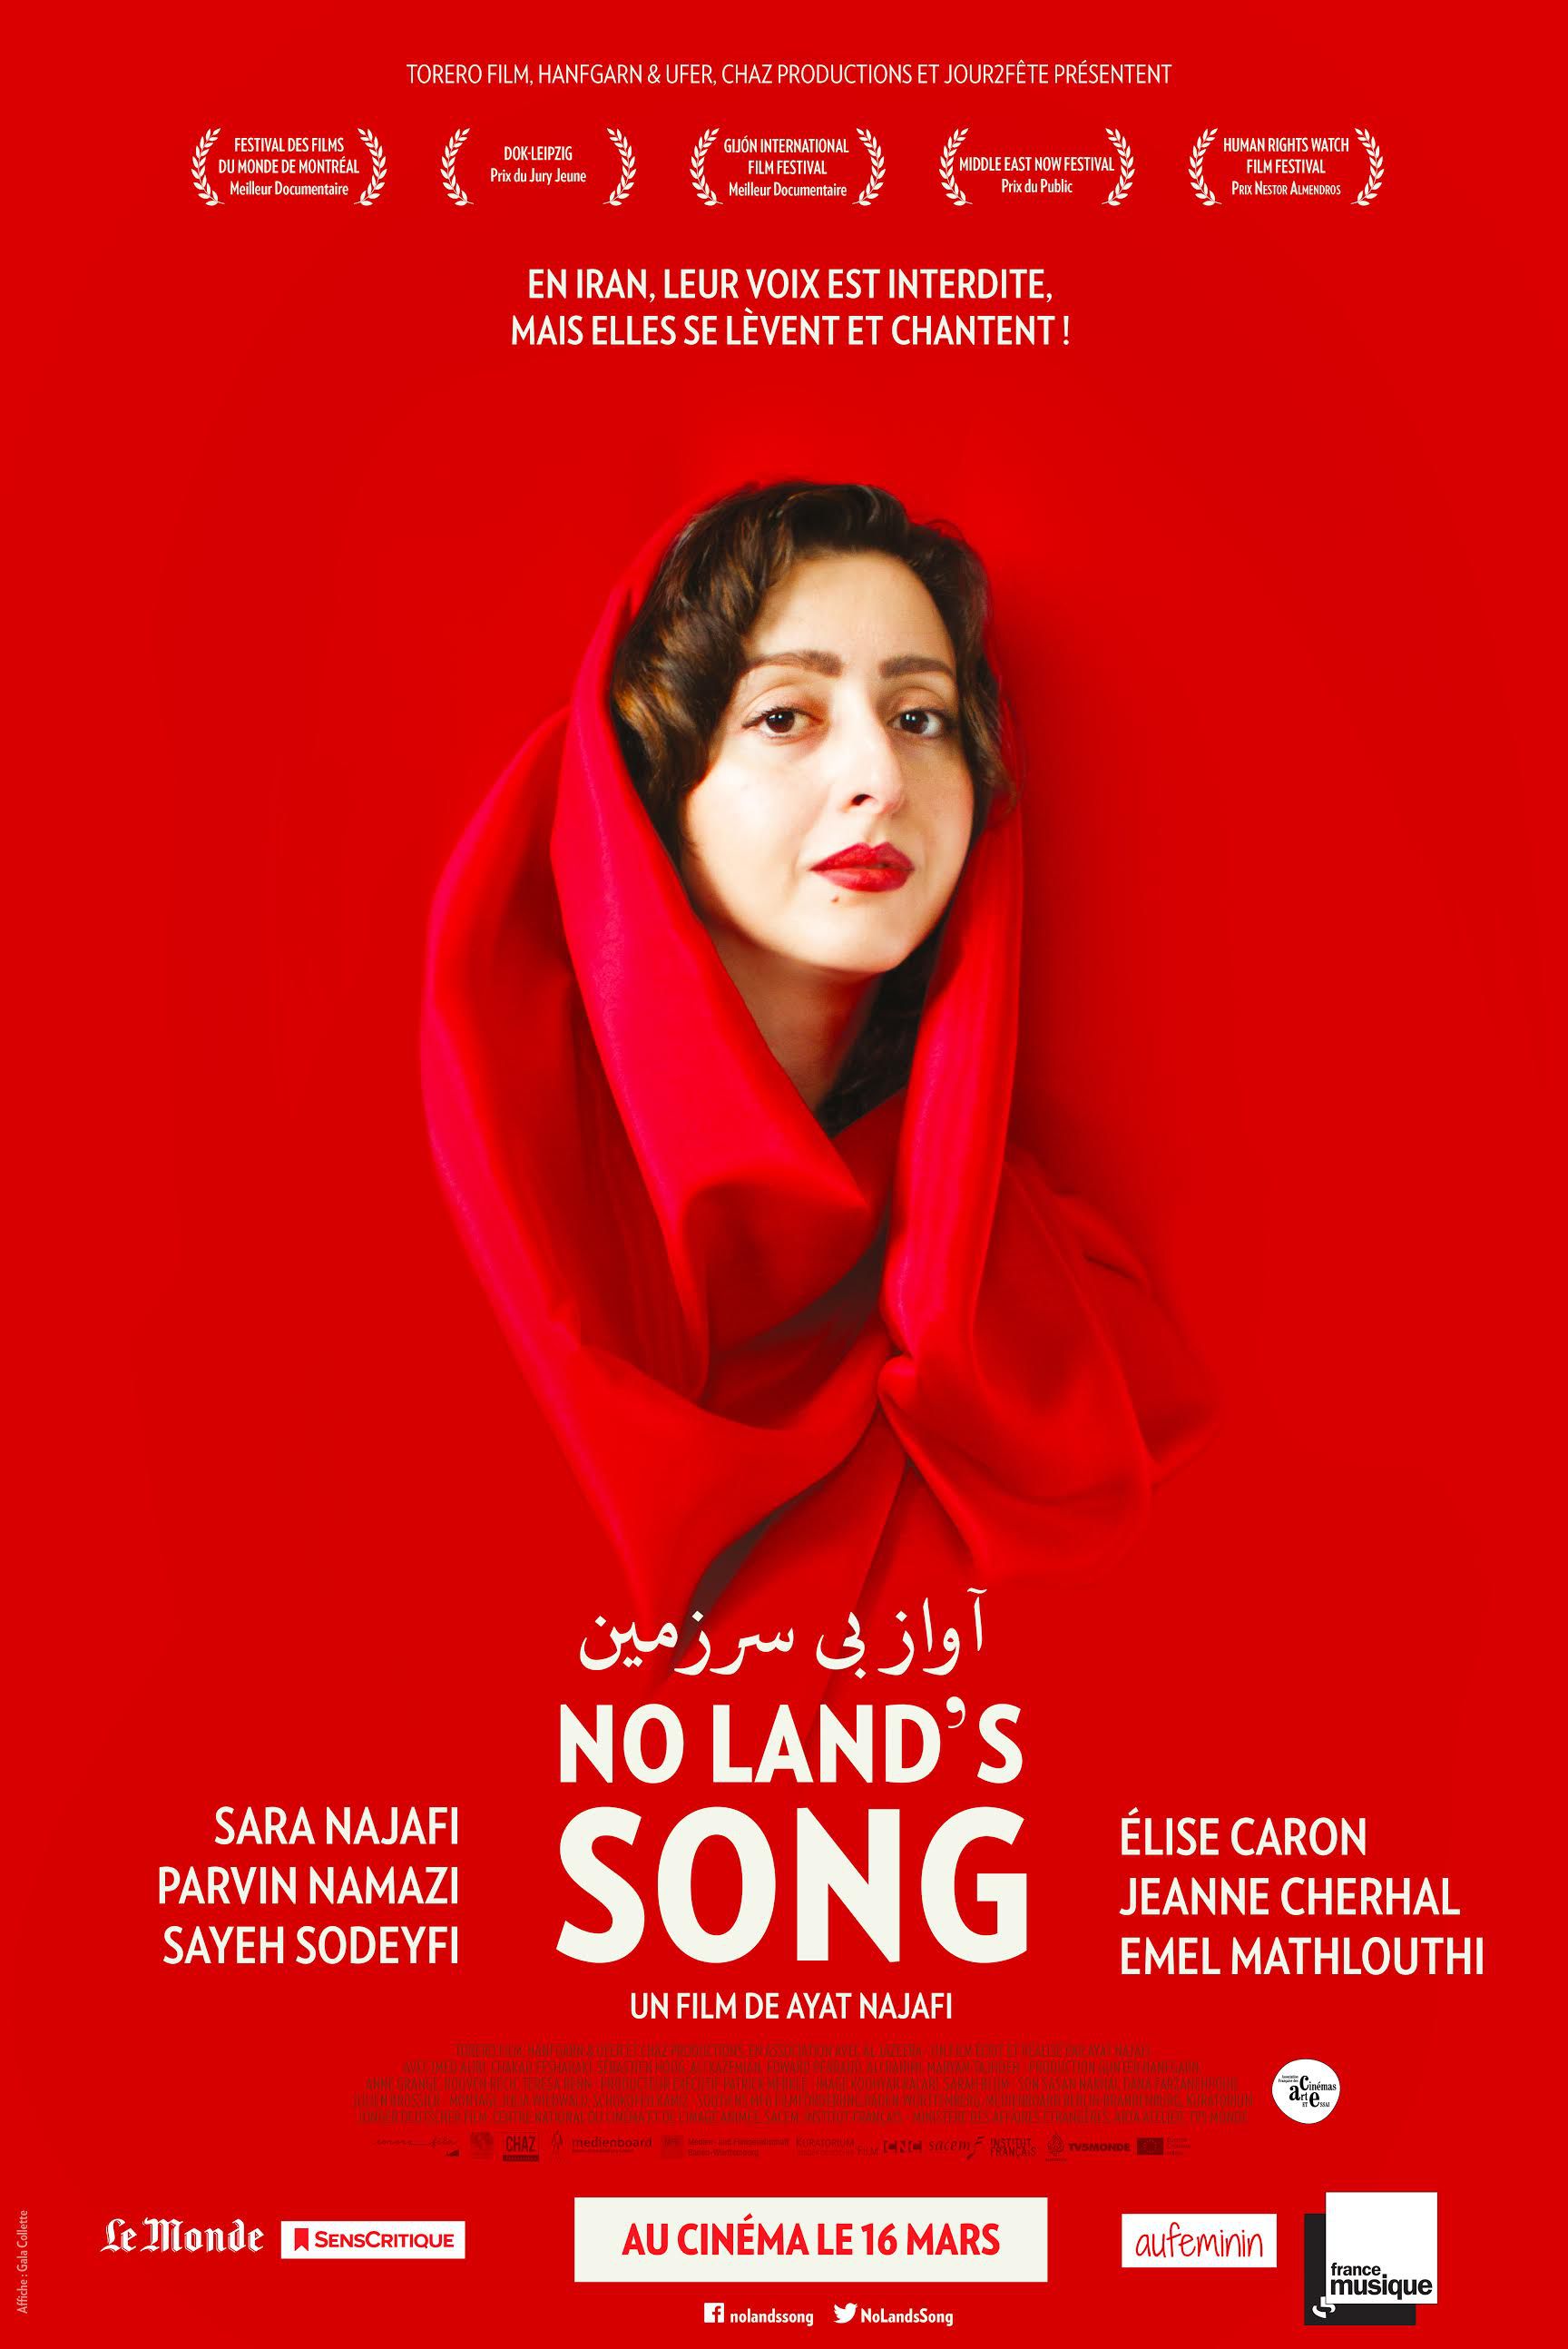 No Land's Song - Documentaire (2016) streaming VF gratuit complet